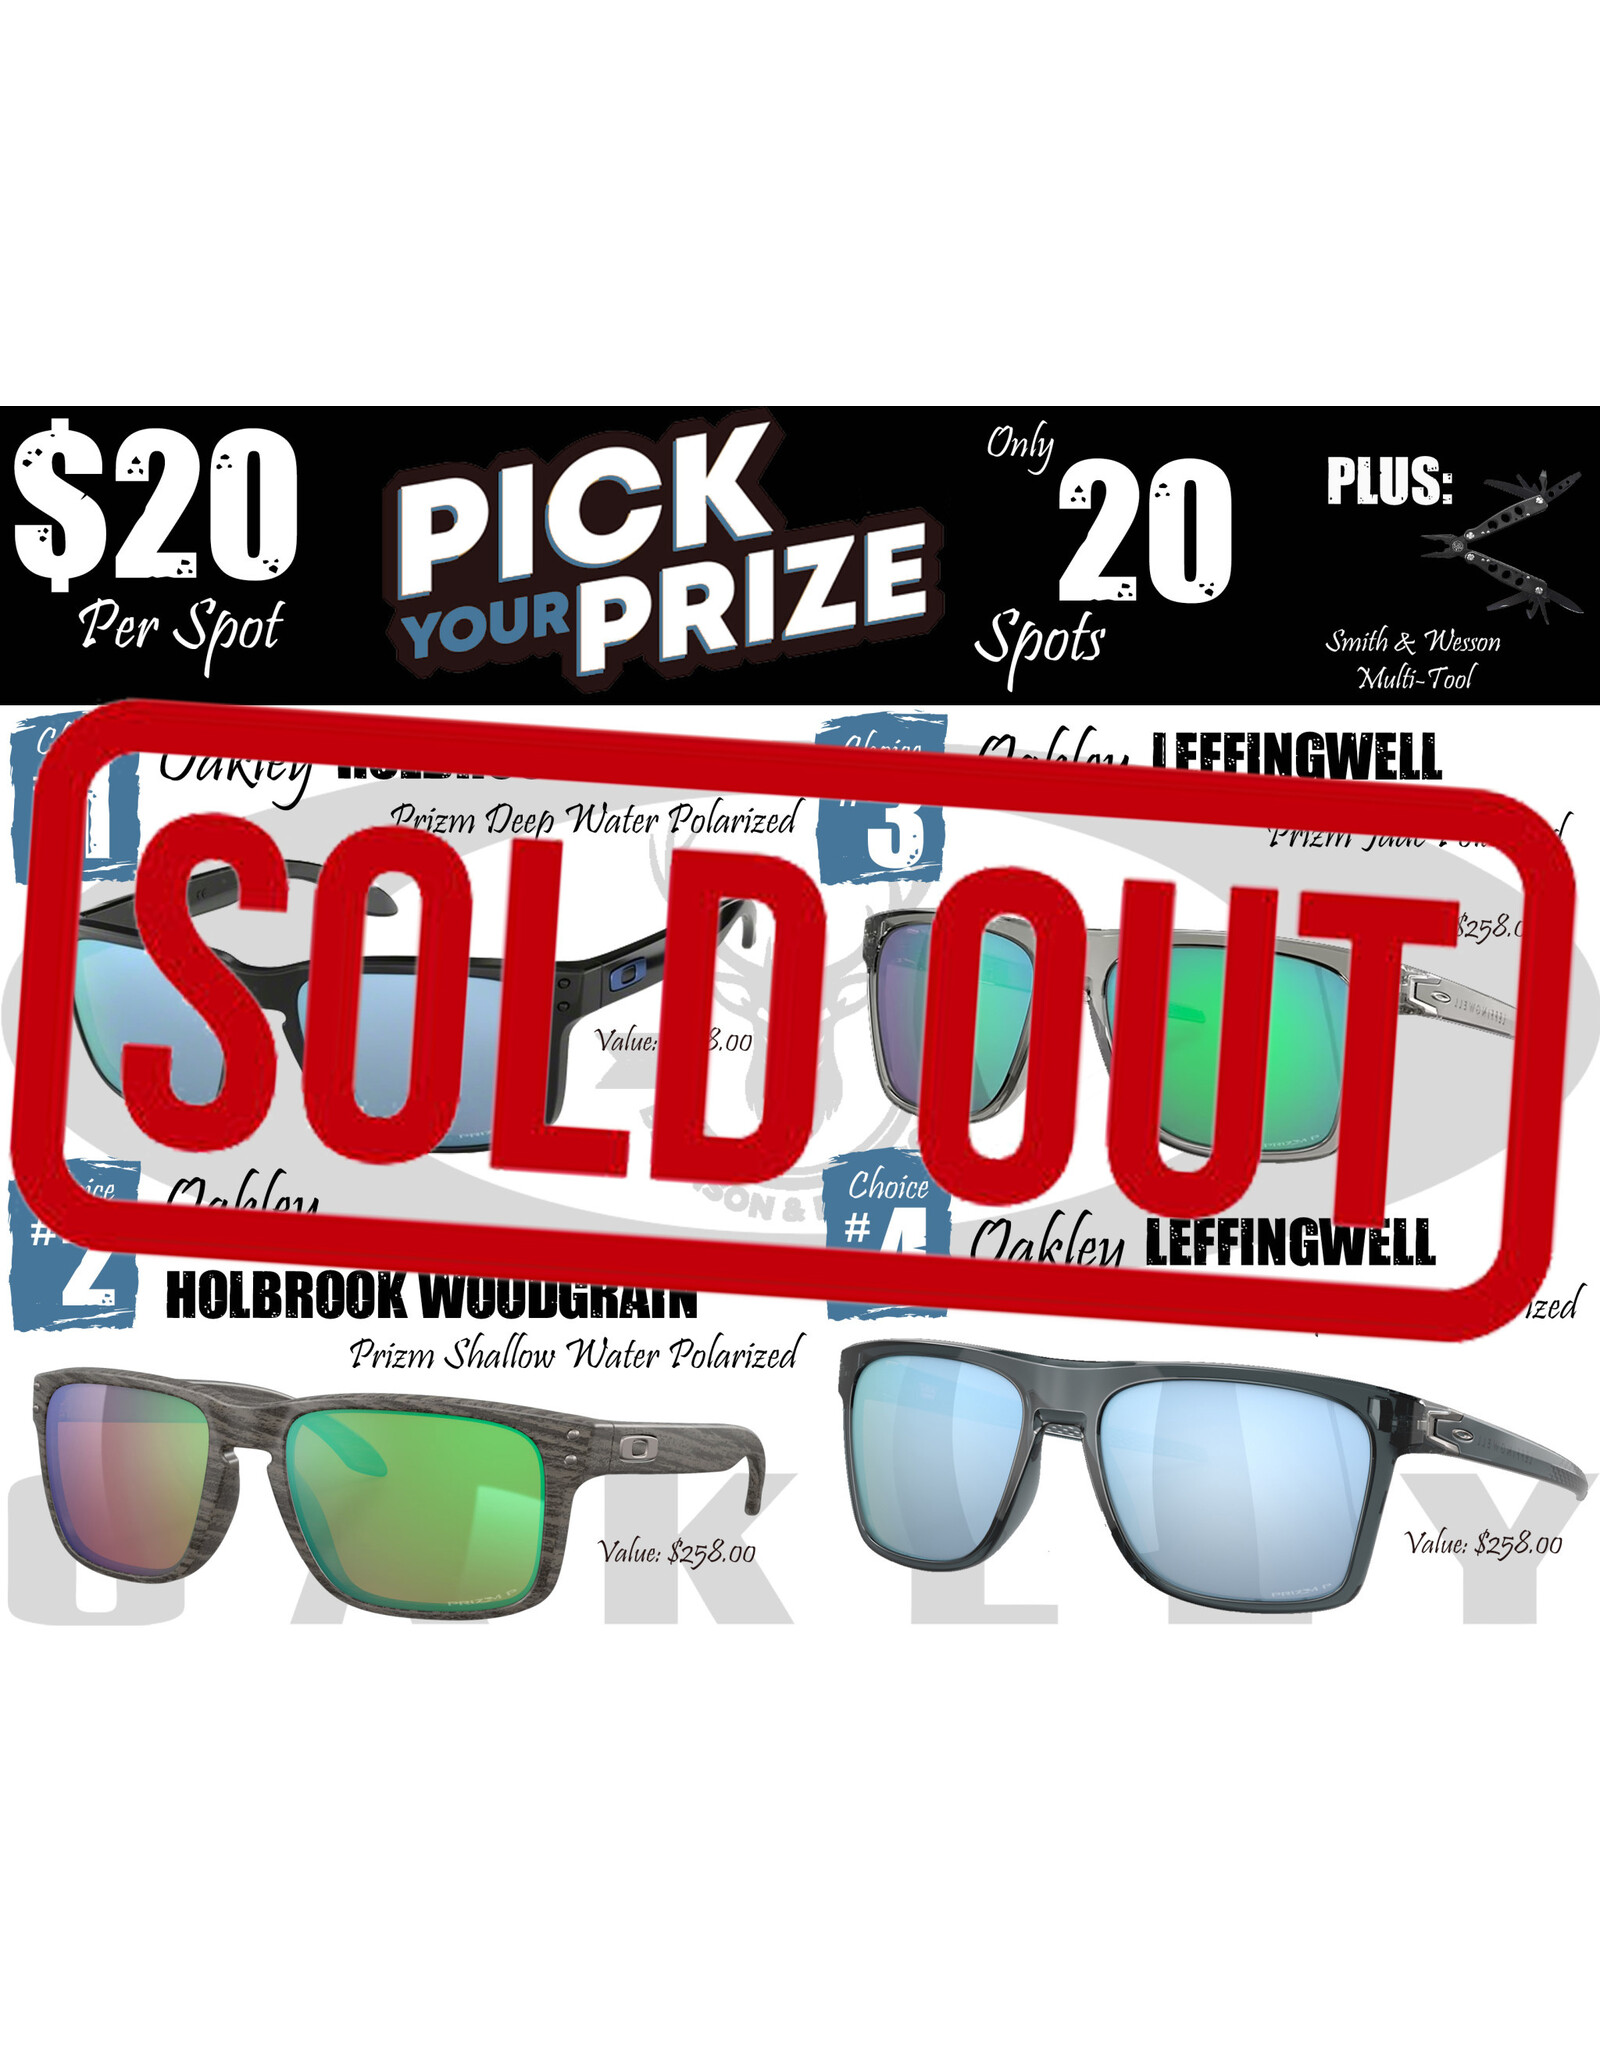 DRAW #1345 - Pick Your Prize - OAKLEYS 1 OF 4!